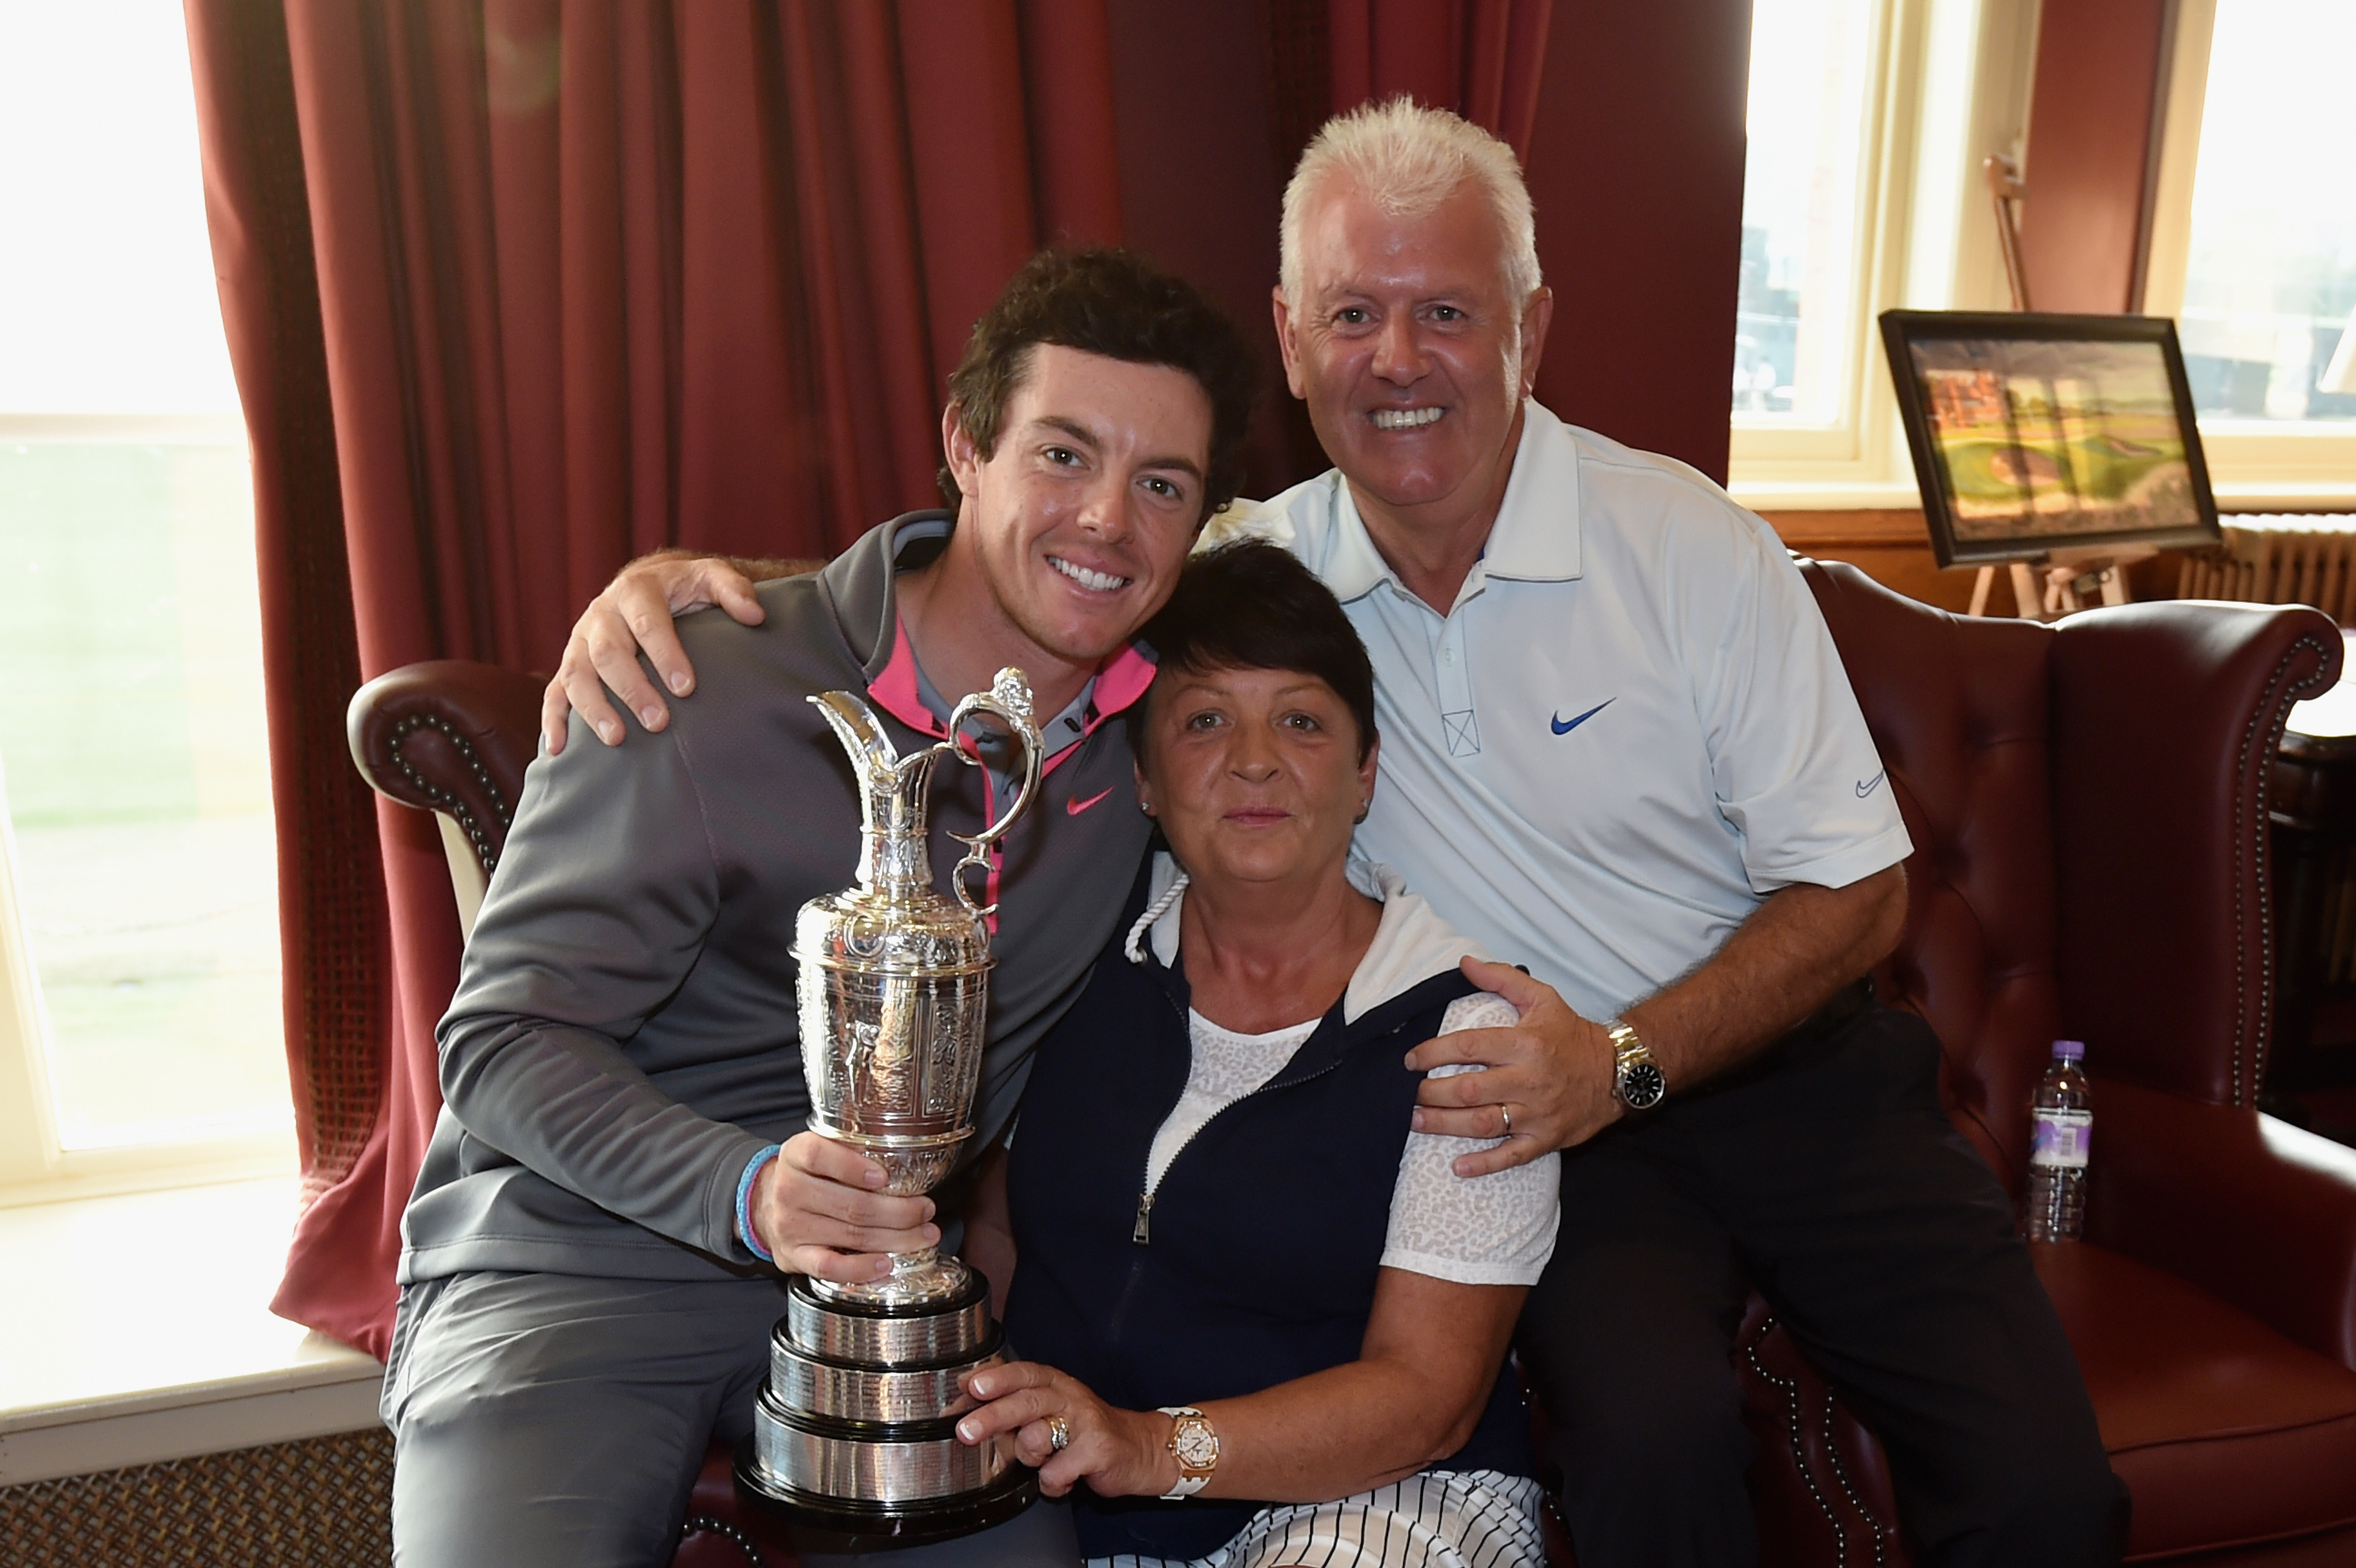 Rory McIlroy’s Parents Cleaned Toilets and Worked Night Shifts to Support Their Son’s Golf Career